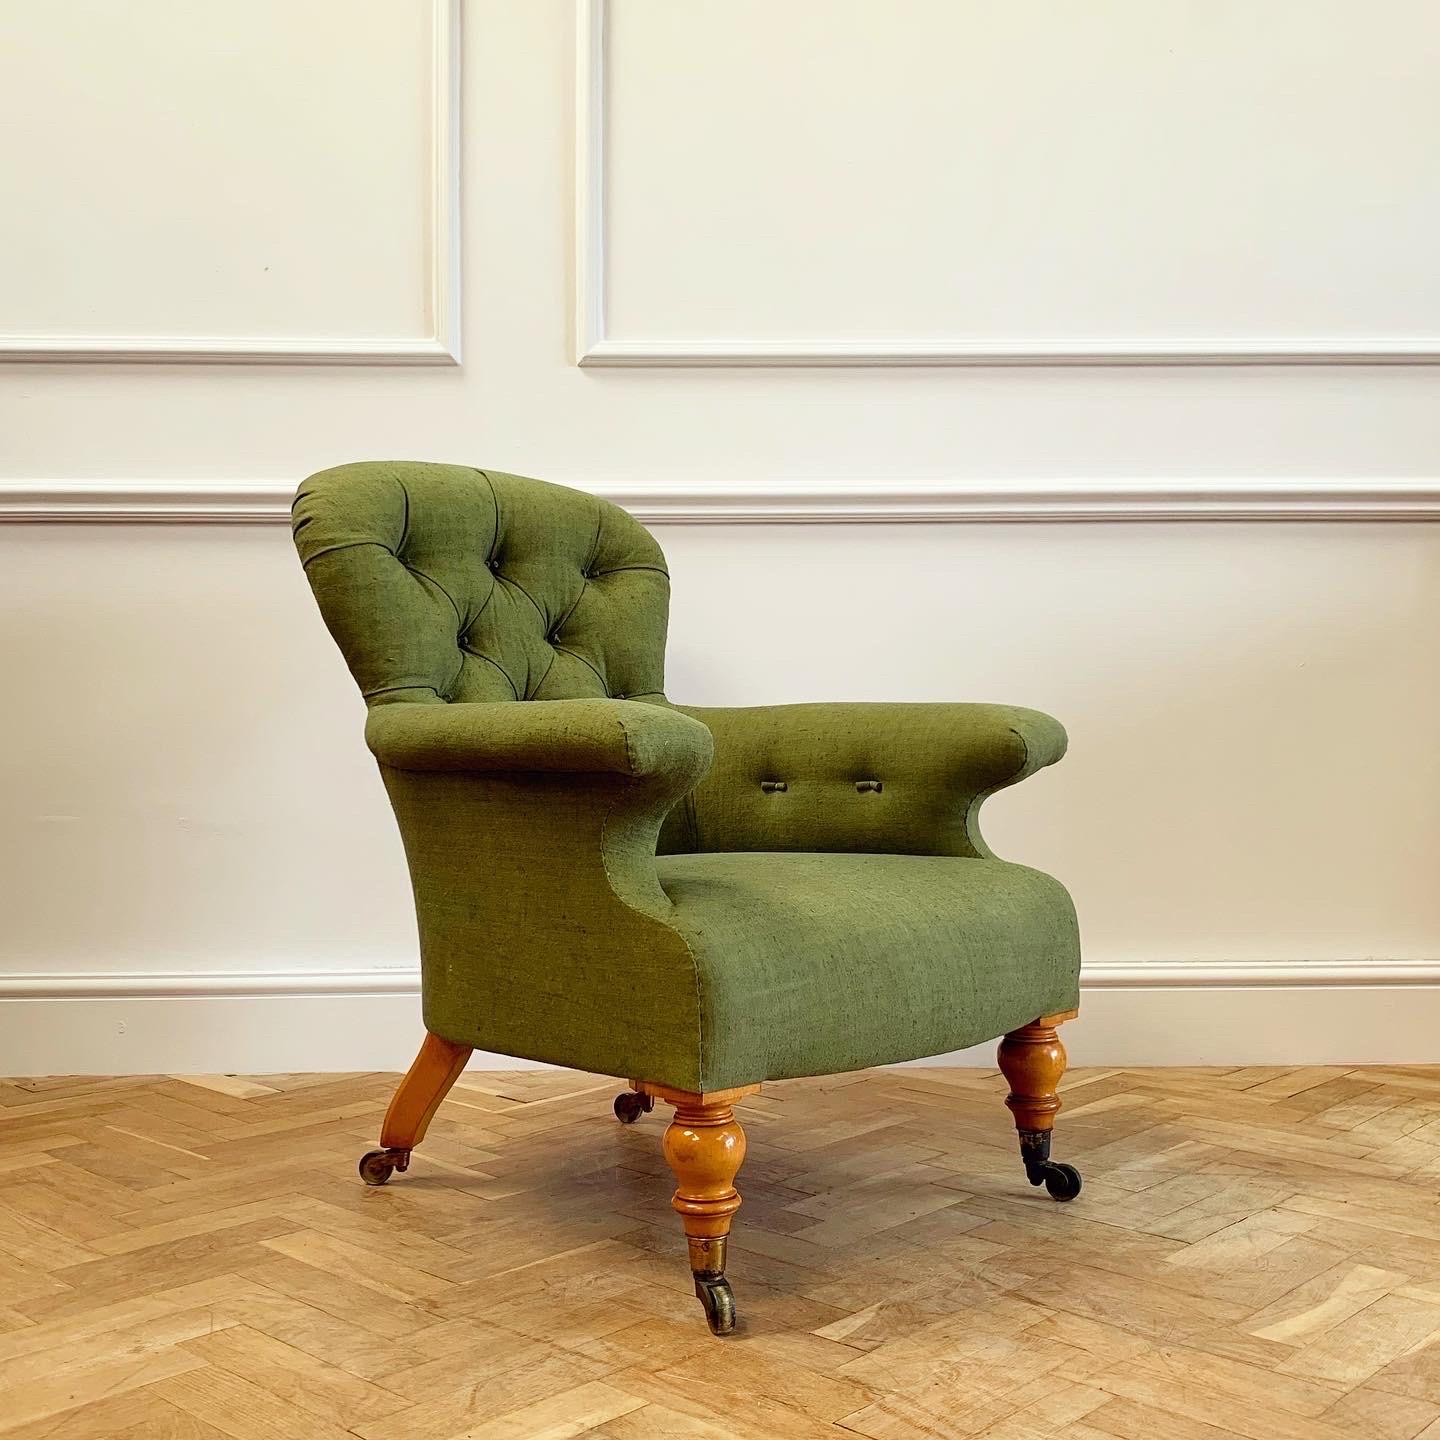 An elegant Hindley & Sons upholstered armchair with satinwood legs, newly covered using naturally dyed antique linen in bottle green.

English, early nineteenth century.